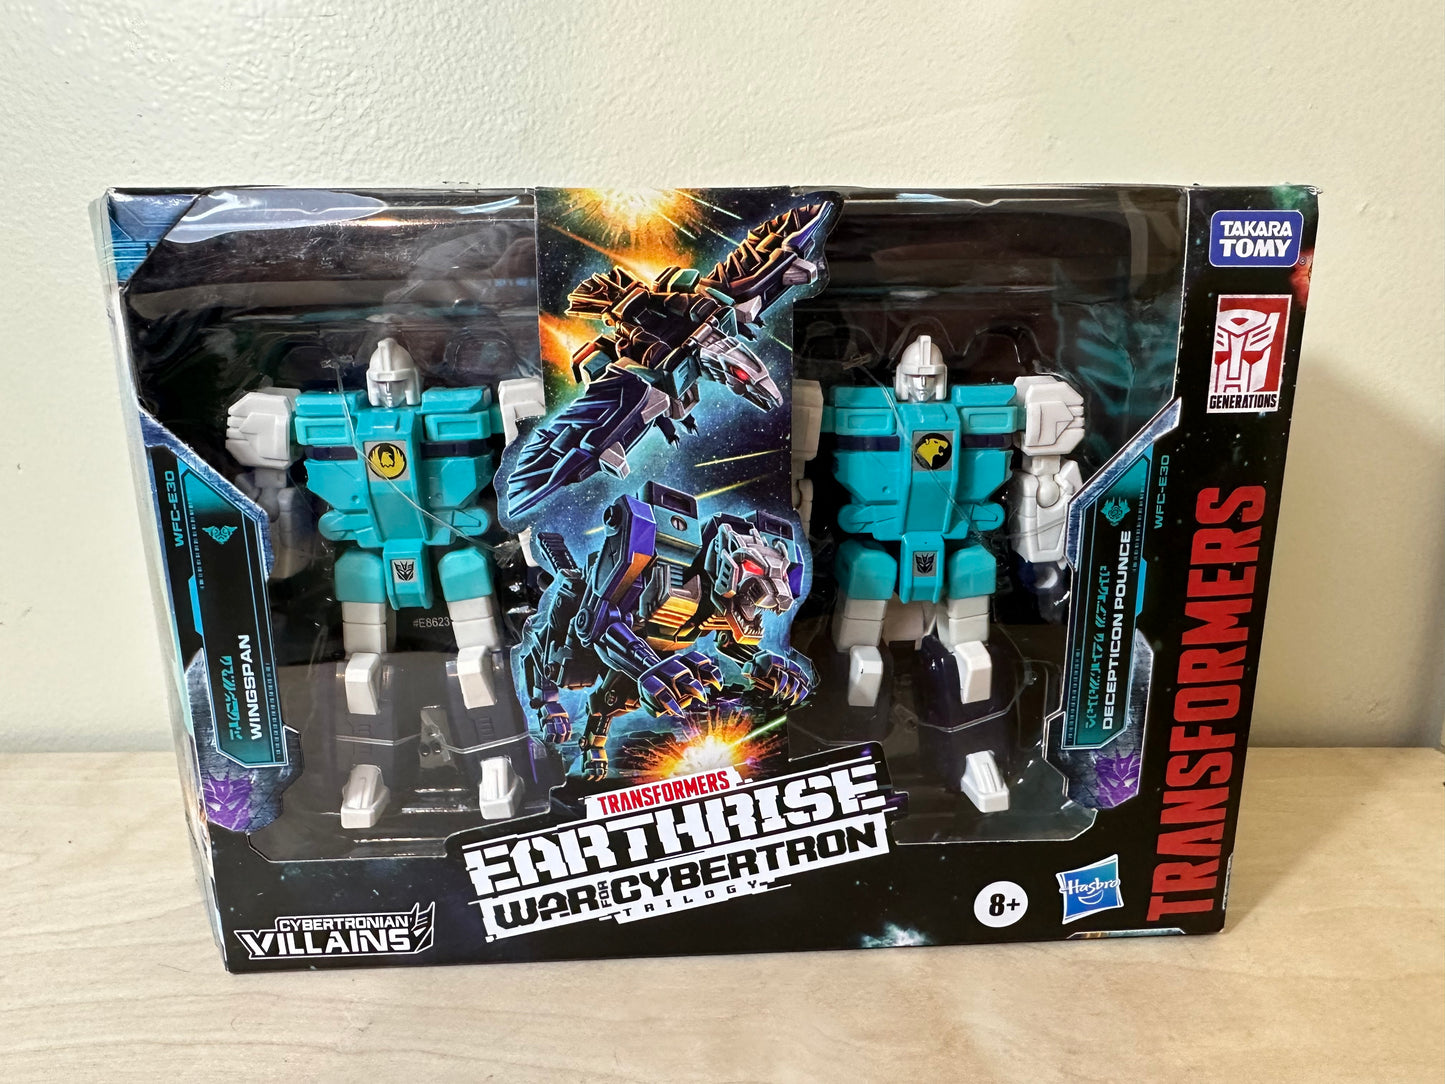 Transformers Earthrise WFT Decepticon Wingspan and Pounce 2 Pack Action Figure Toy